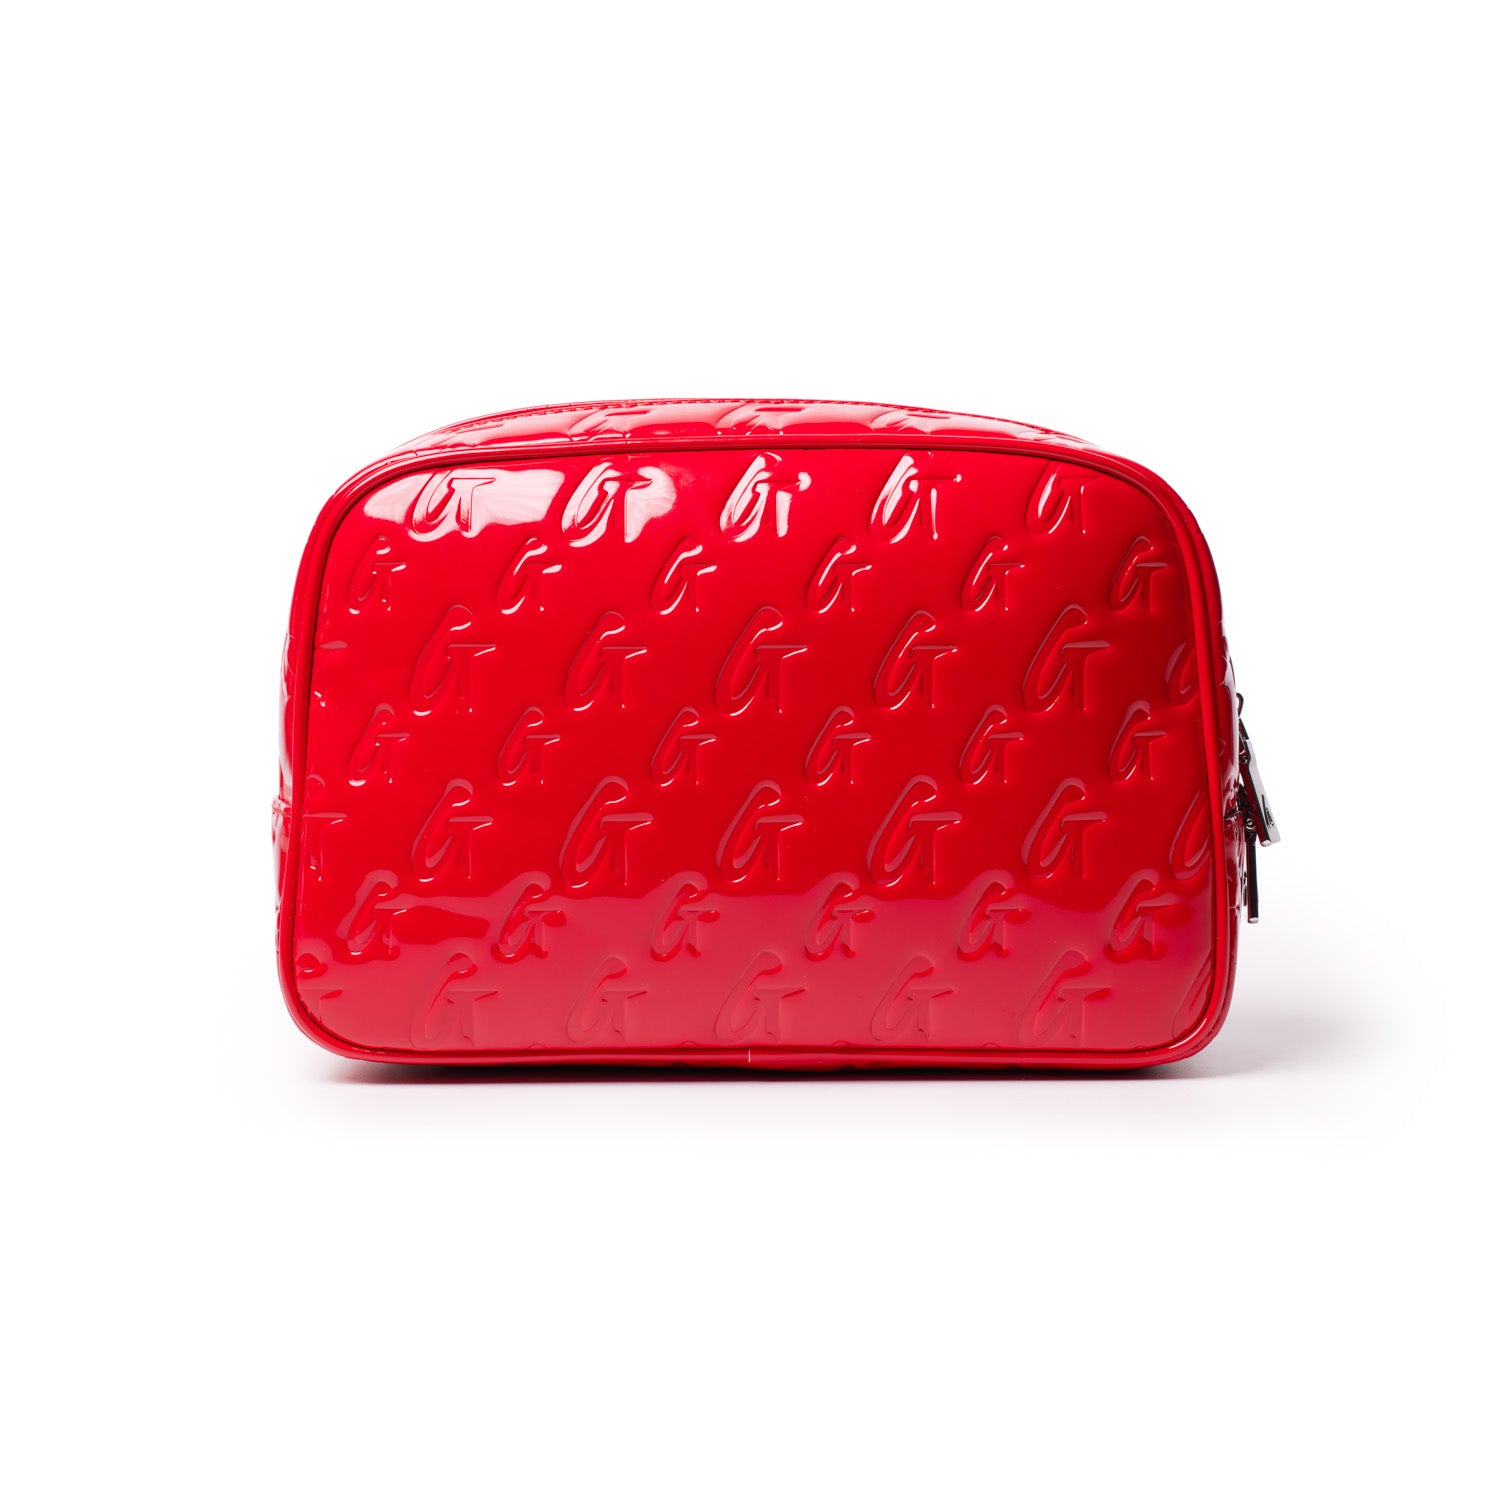 MONOGRAM SMALL COSMETIC TOILETRY BAG MIRROR RED